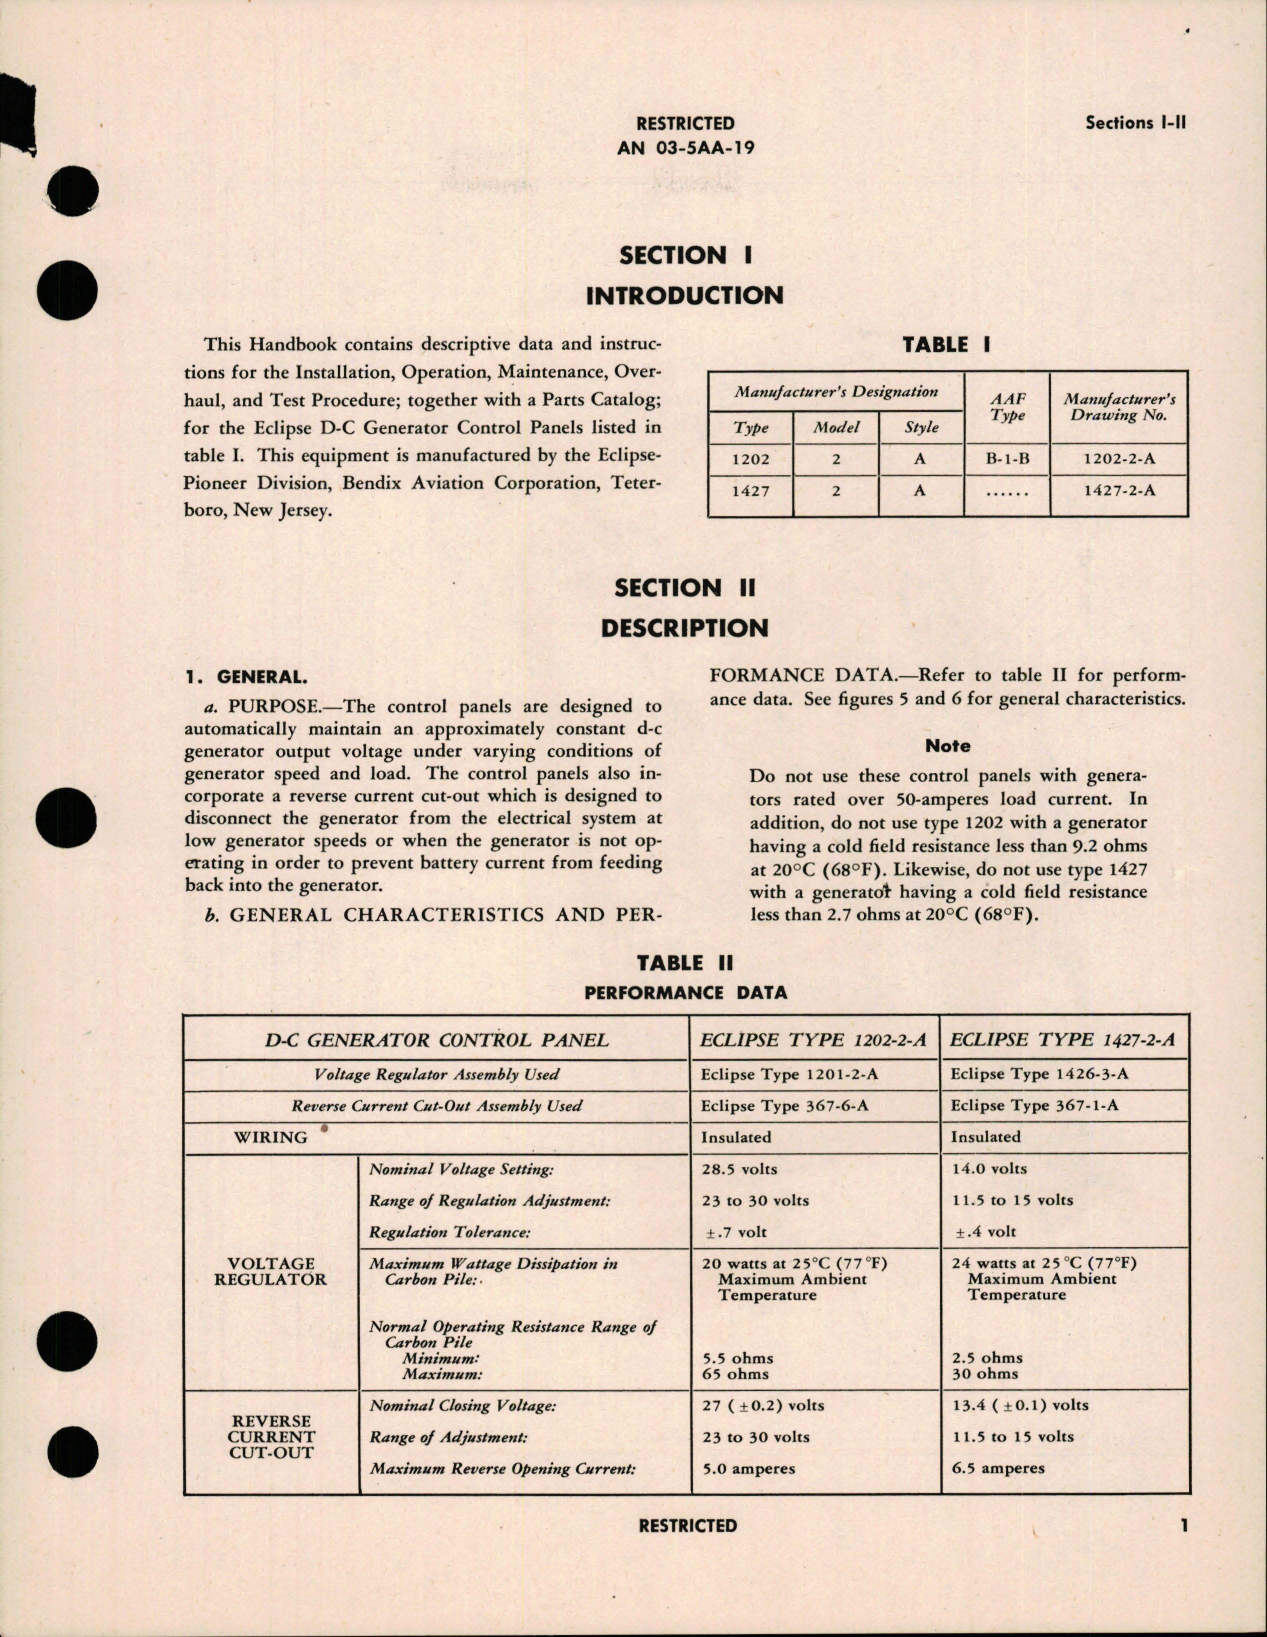 Sample page 5 from AirCorps Library document: Operation, Service & Overhaul Instructions with Parts Catalog for DC Generator Control Panels -Types B-1-B, 1202, 1427